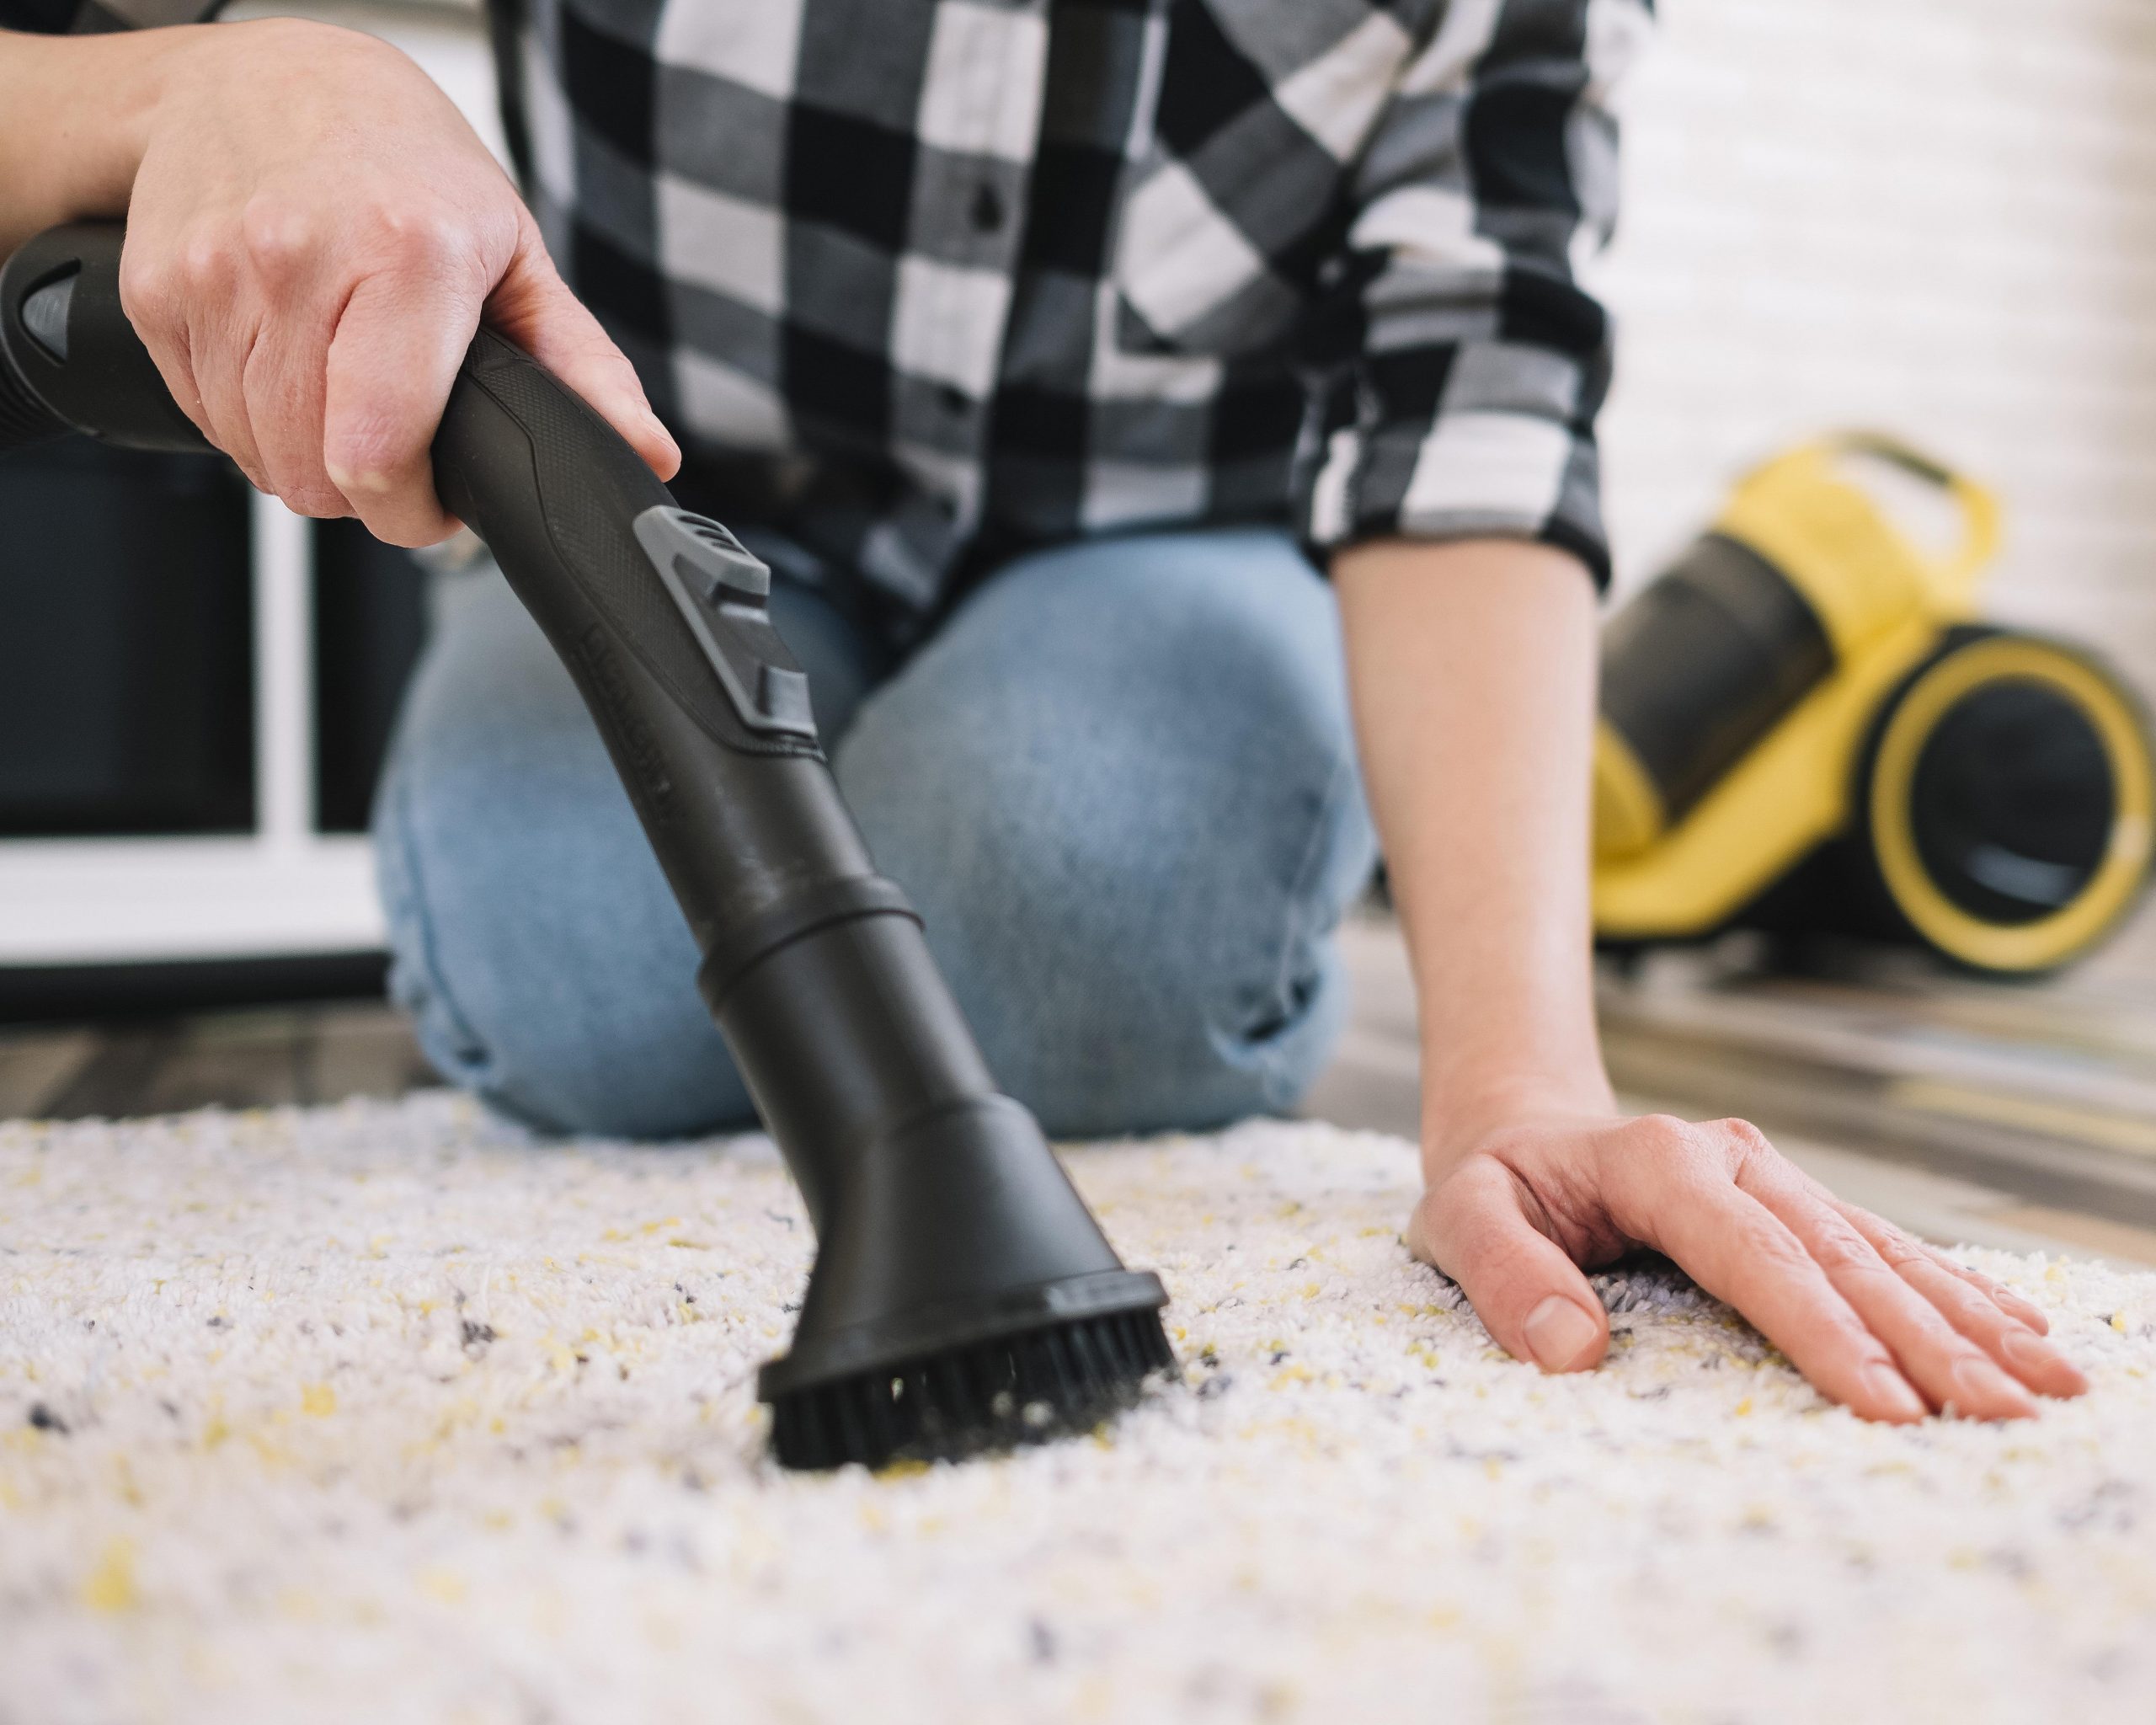 10 Best Vacuums for High Pile Carpets (2020 Updated Review)